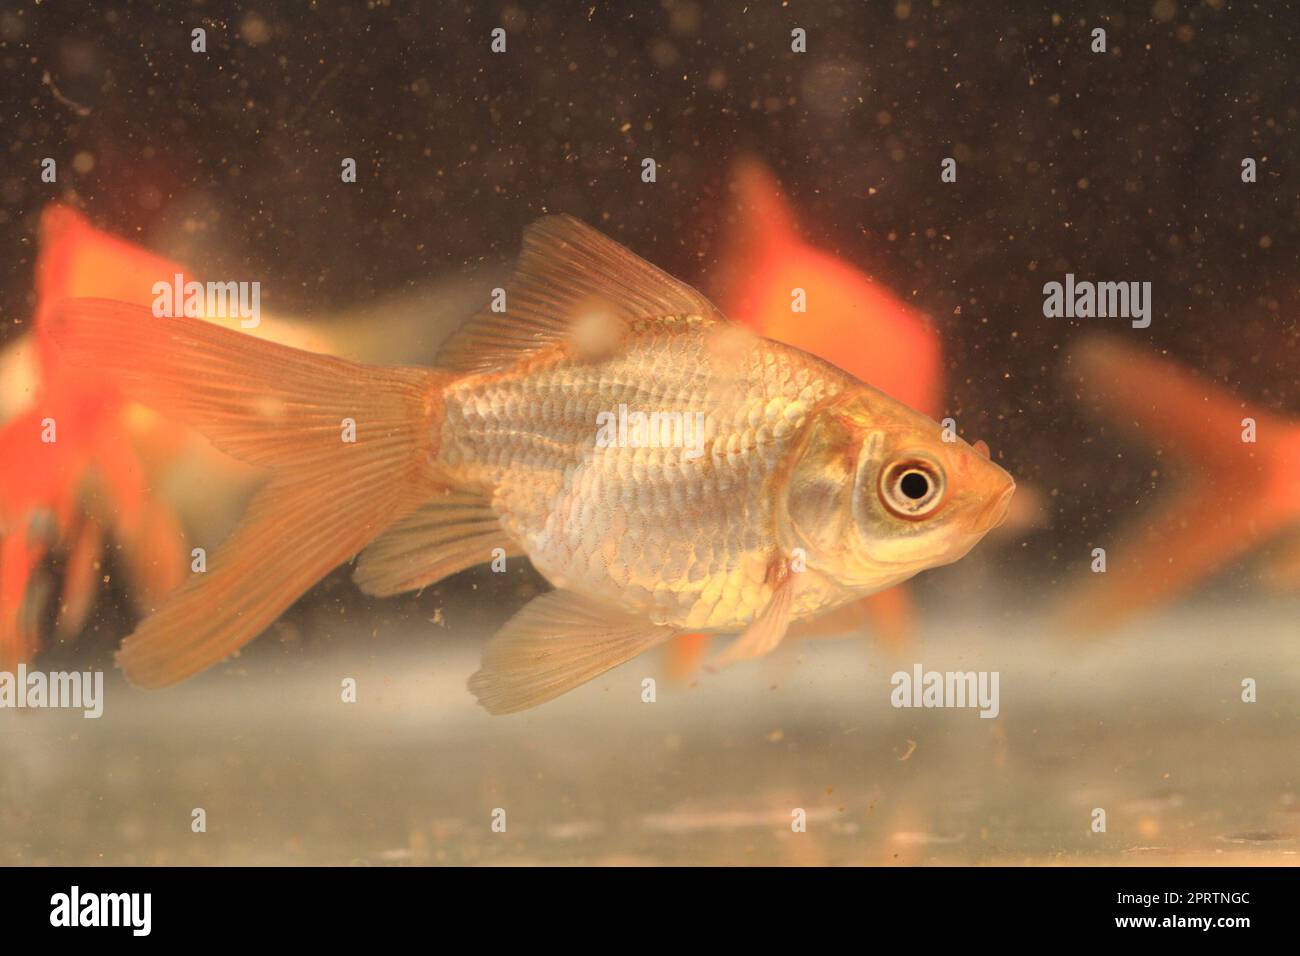 young small goldfish as most know fish Stock Photo